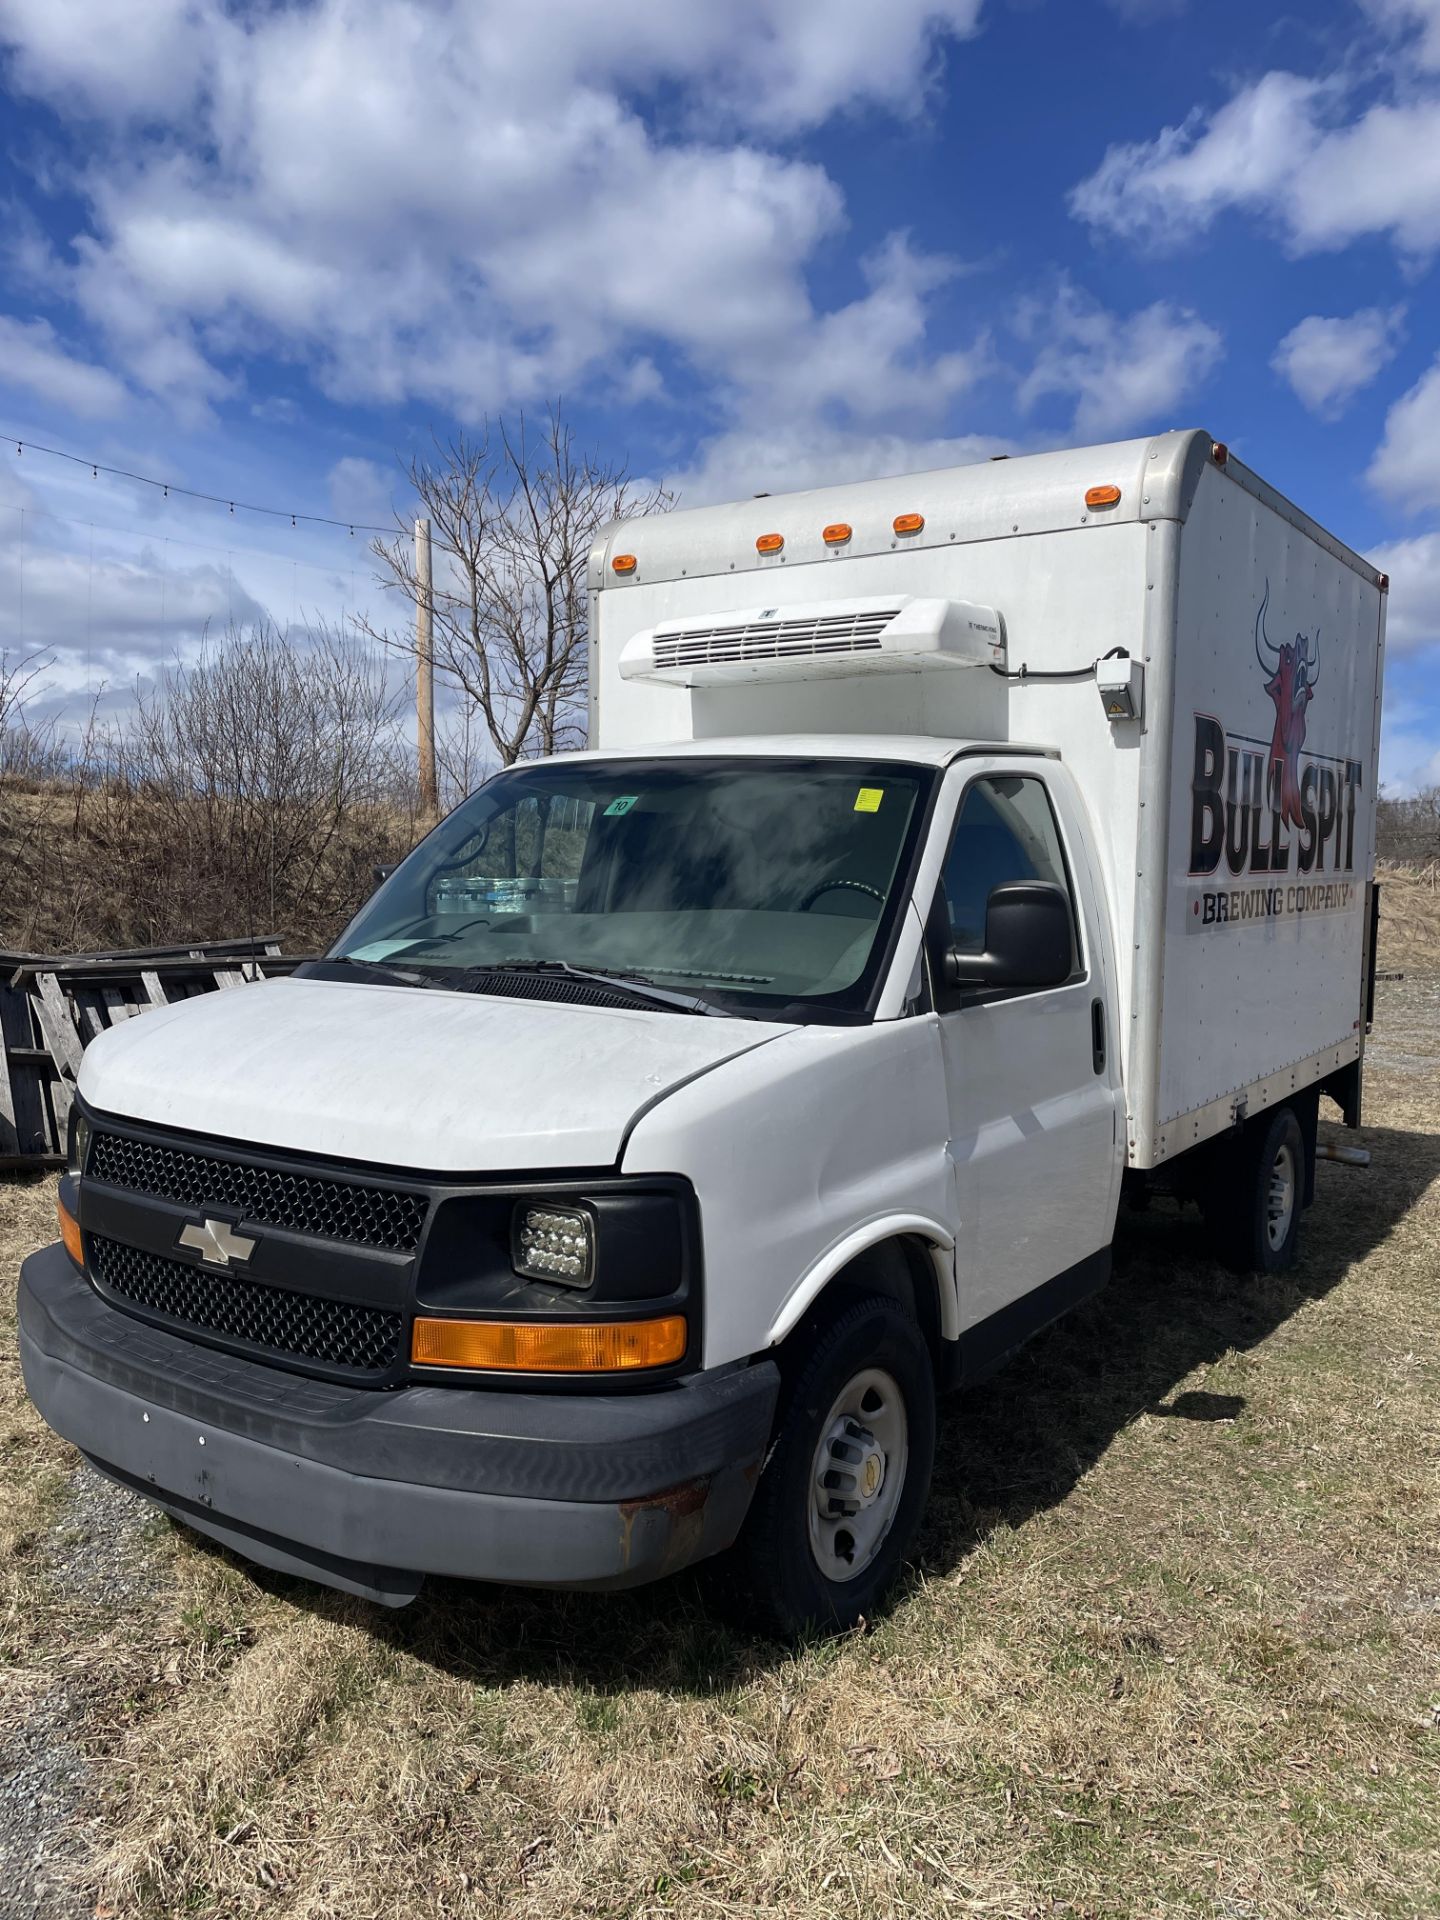 2005 Chevrolet Box Truck w/ 10' Refrigerated Box, Odom: 19,653, 1300Lb Capacity Lift Gate, Gas, Aut - Image 5 of 15